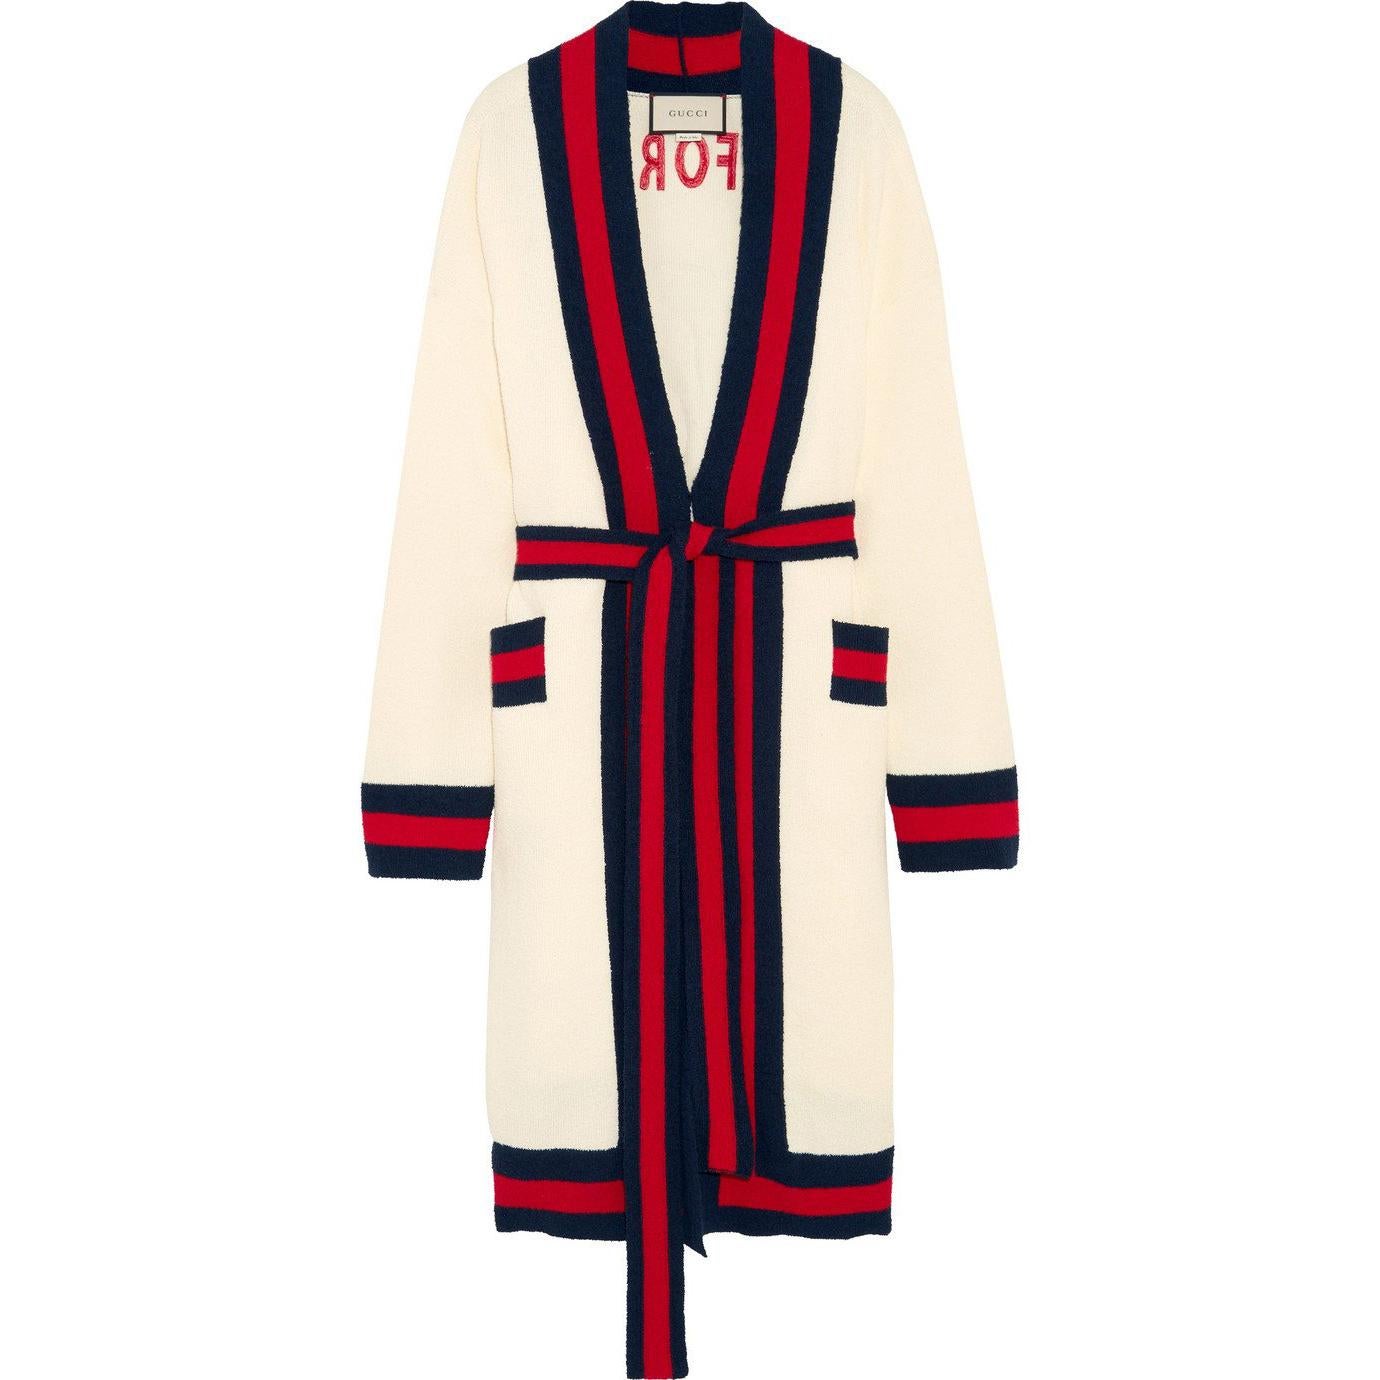 Gucci Embellished Striped Cotton-Blend Terry Cardigan 